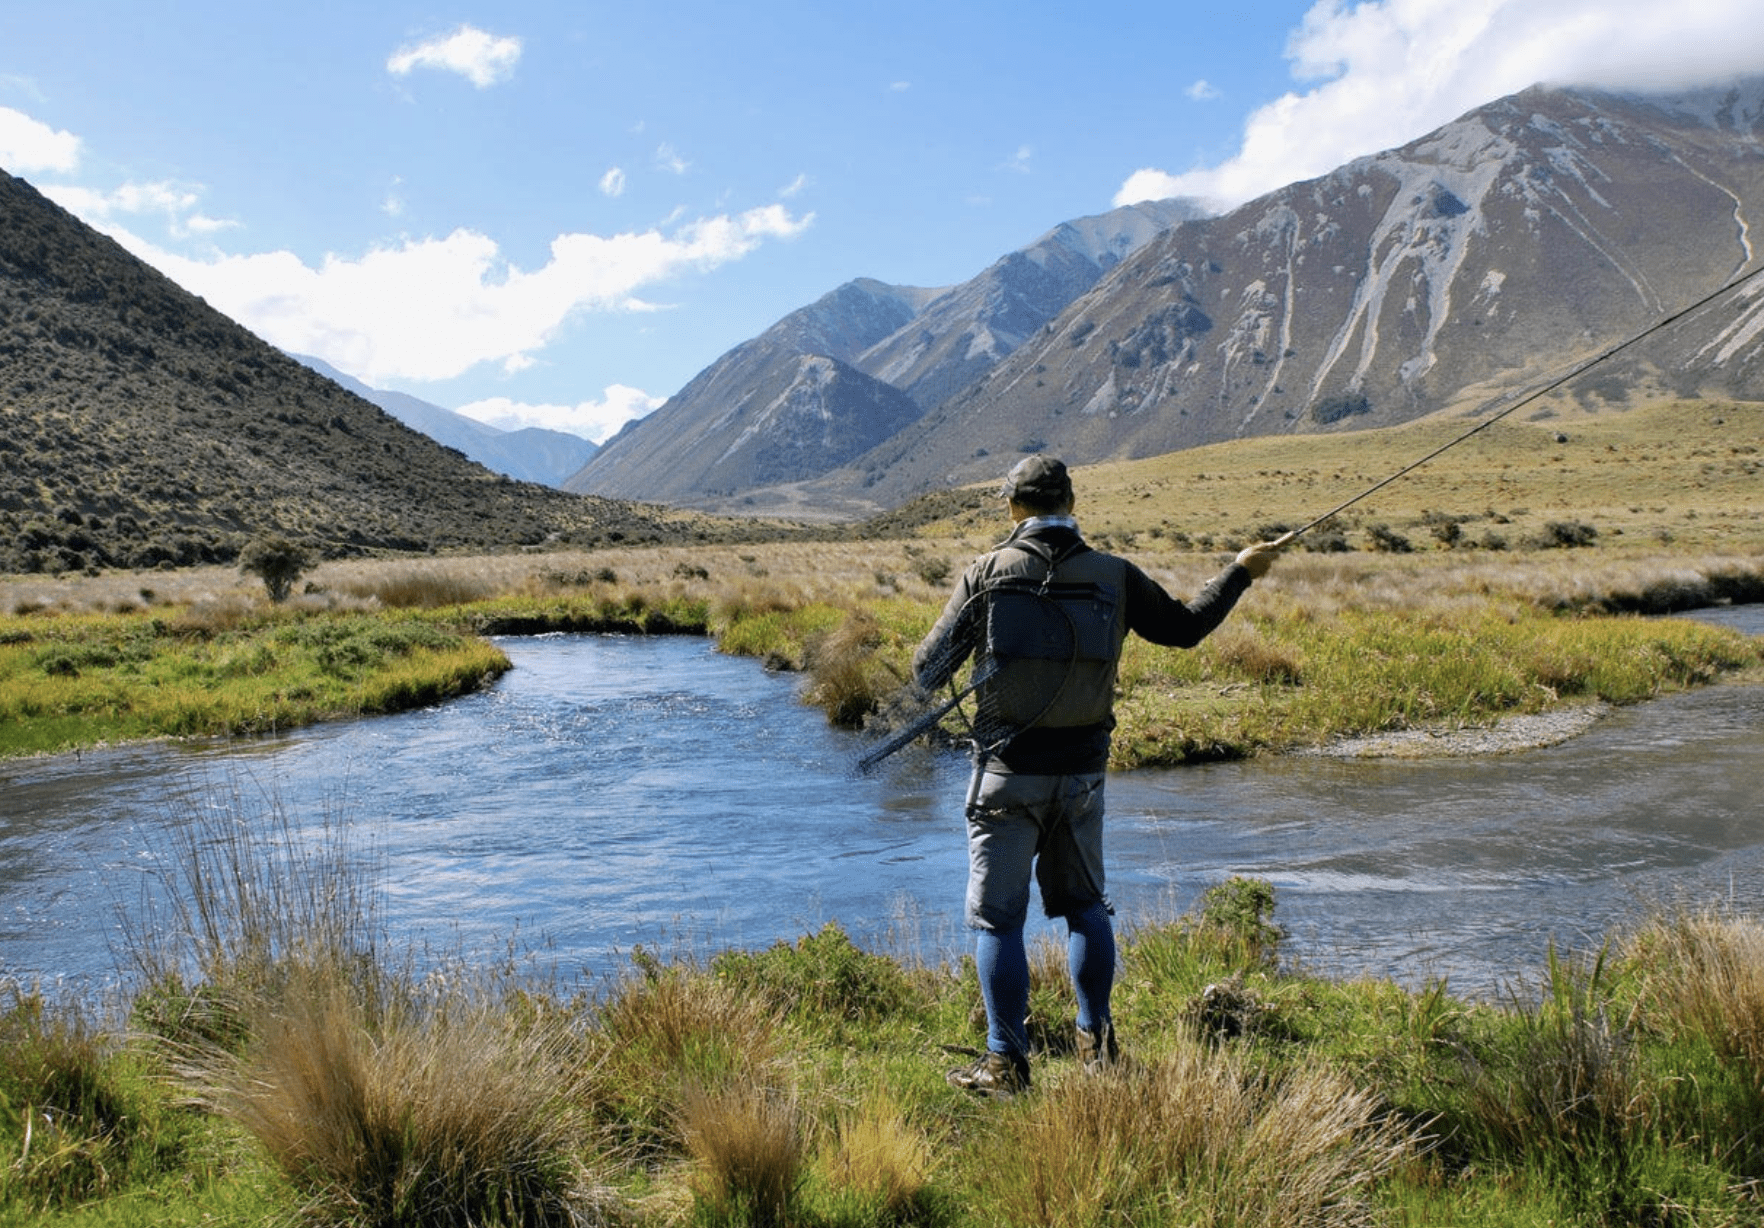 New Zealand fly fishing may just possibly be the mecca of angling for serious fly fishers. The scenery is spectacular and the fly fishing is spectacularly good year round.